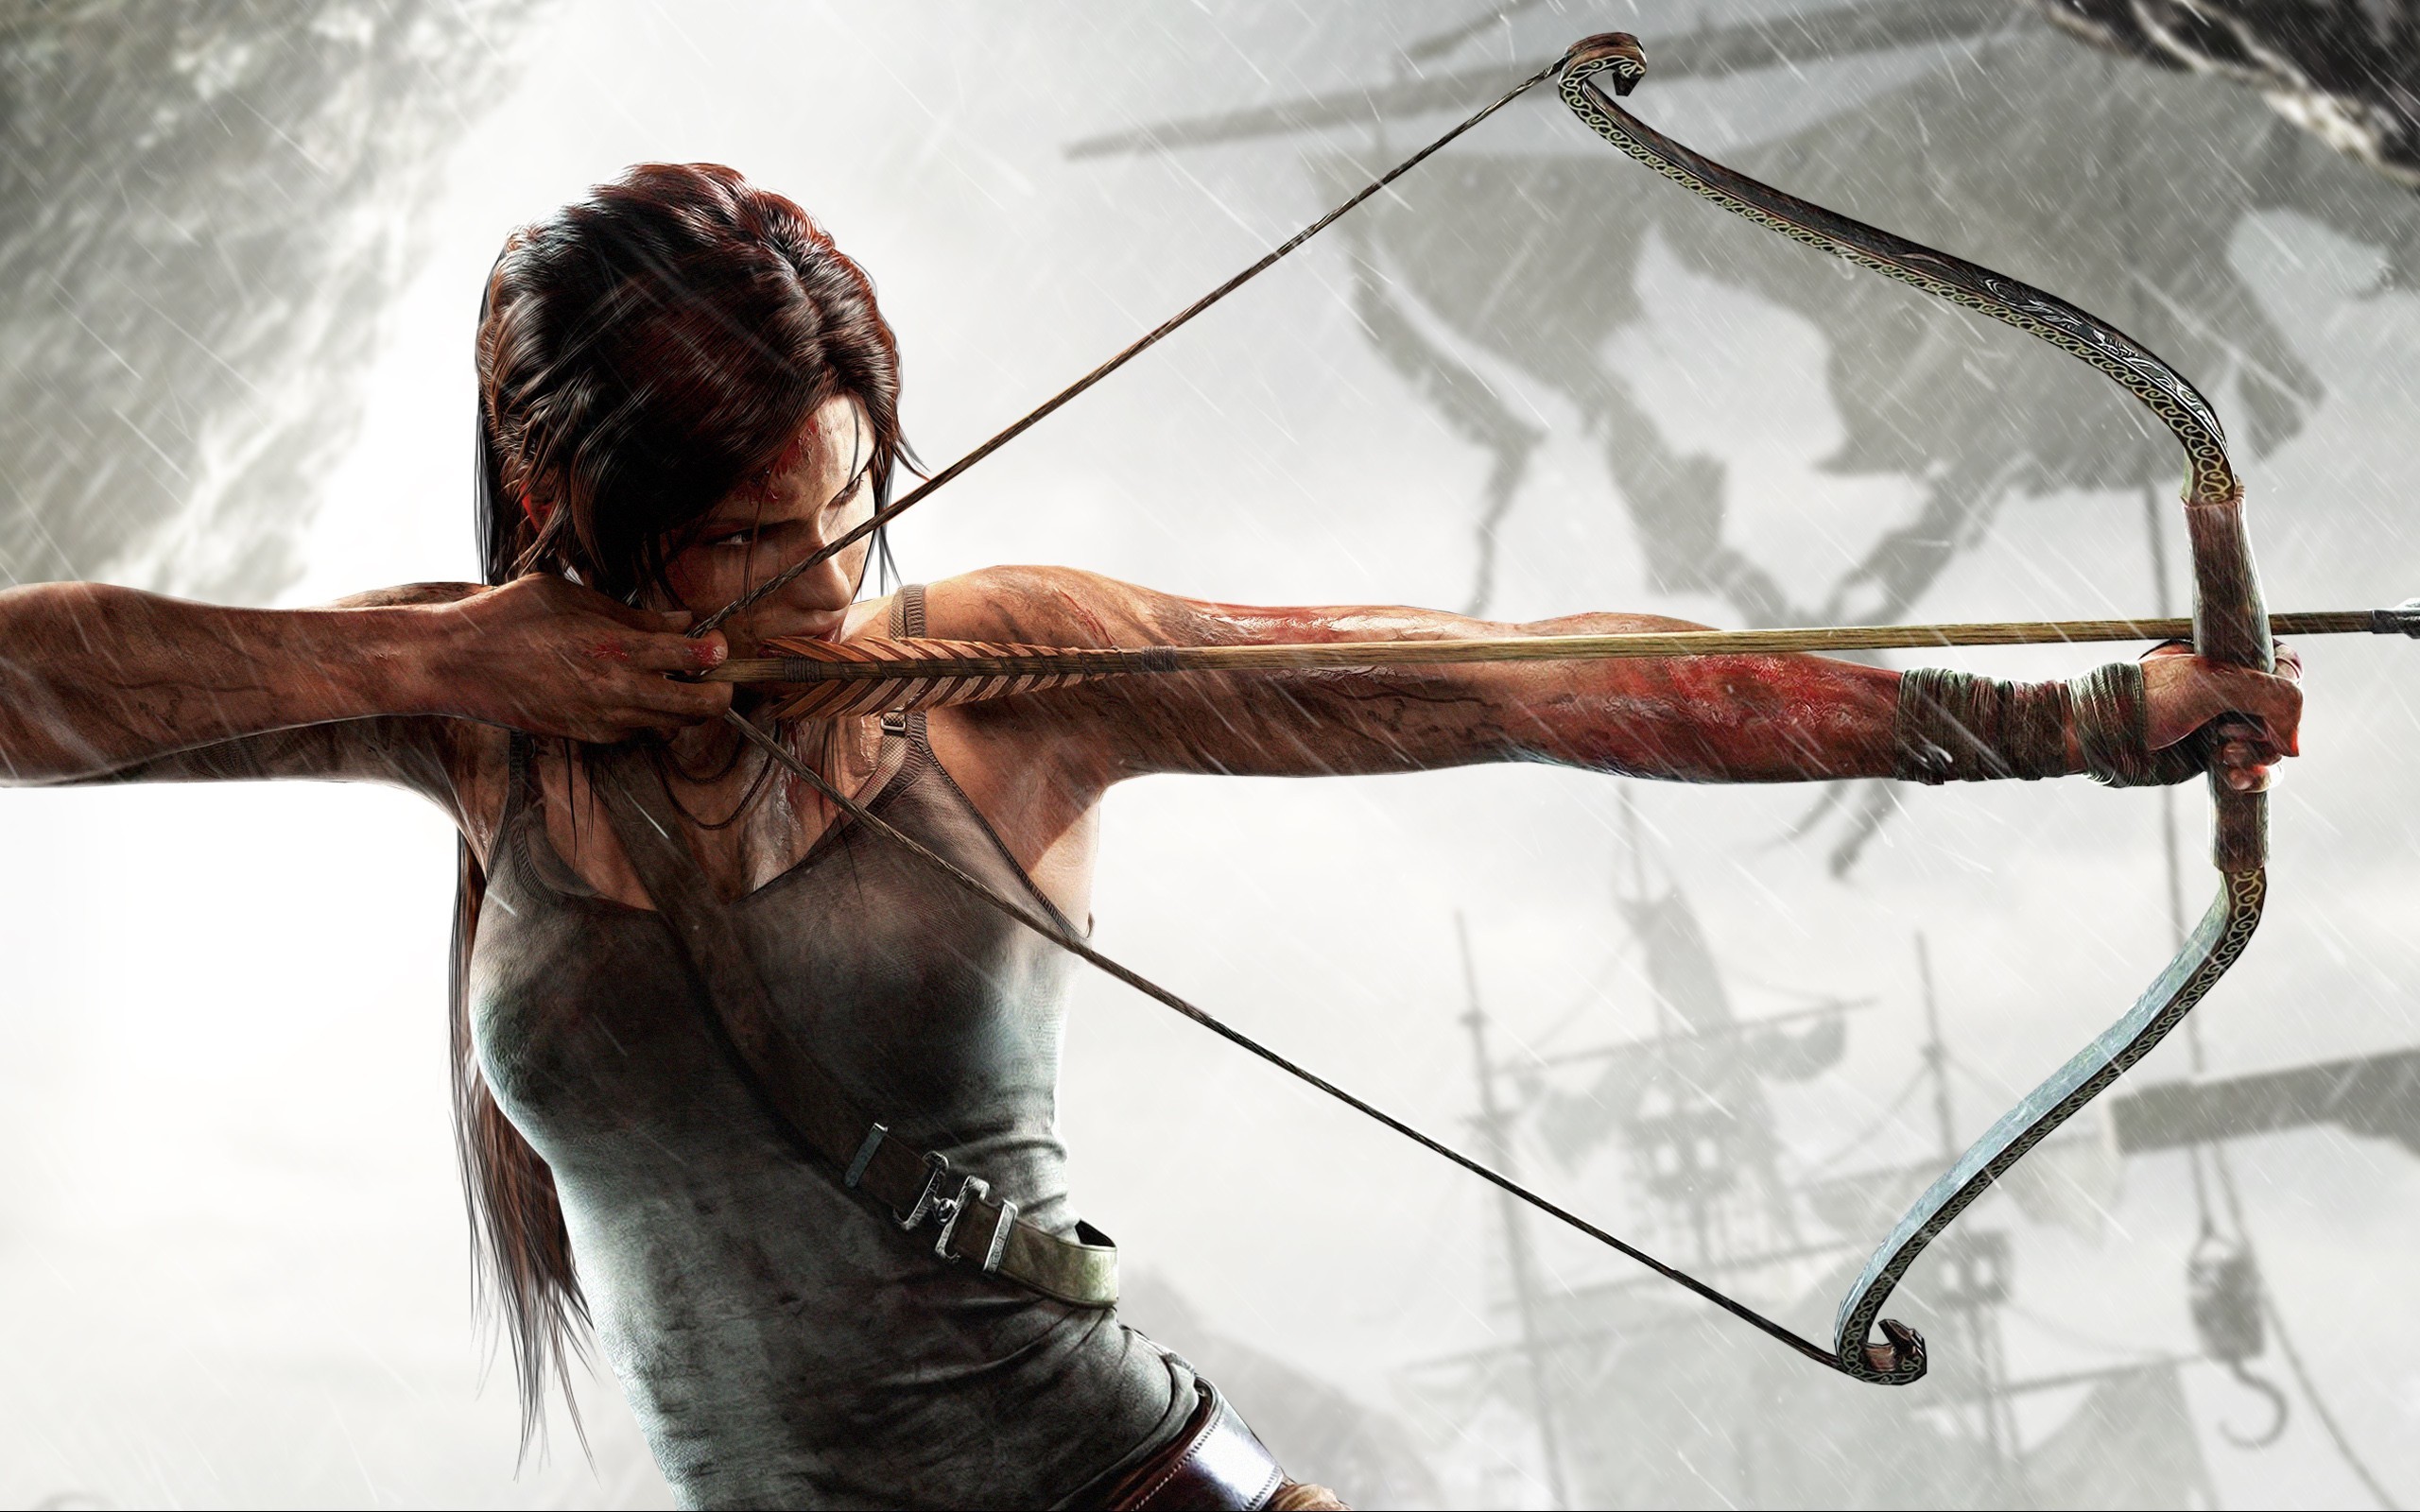 General 2560x1600 video games bow arrows video game girls women Tomb Raider Lara Croft (Tomb Raider) Tomb Raider (2013) Crystal Dynamics rain aiming bow and arrow video game characters blood wounds long hair